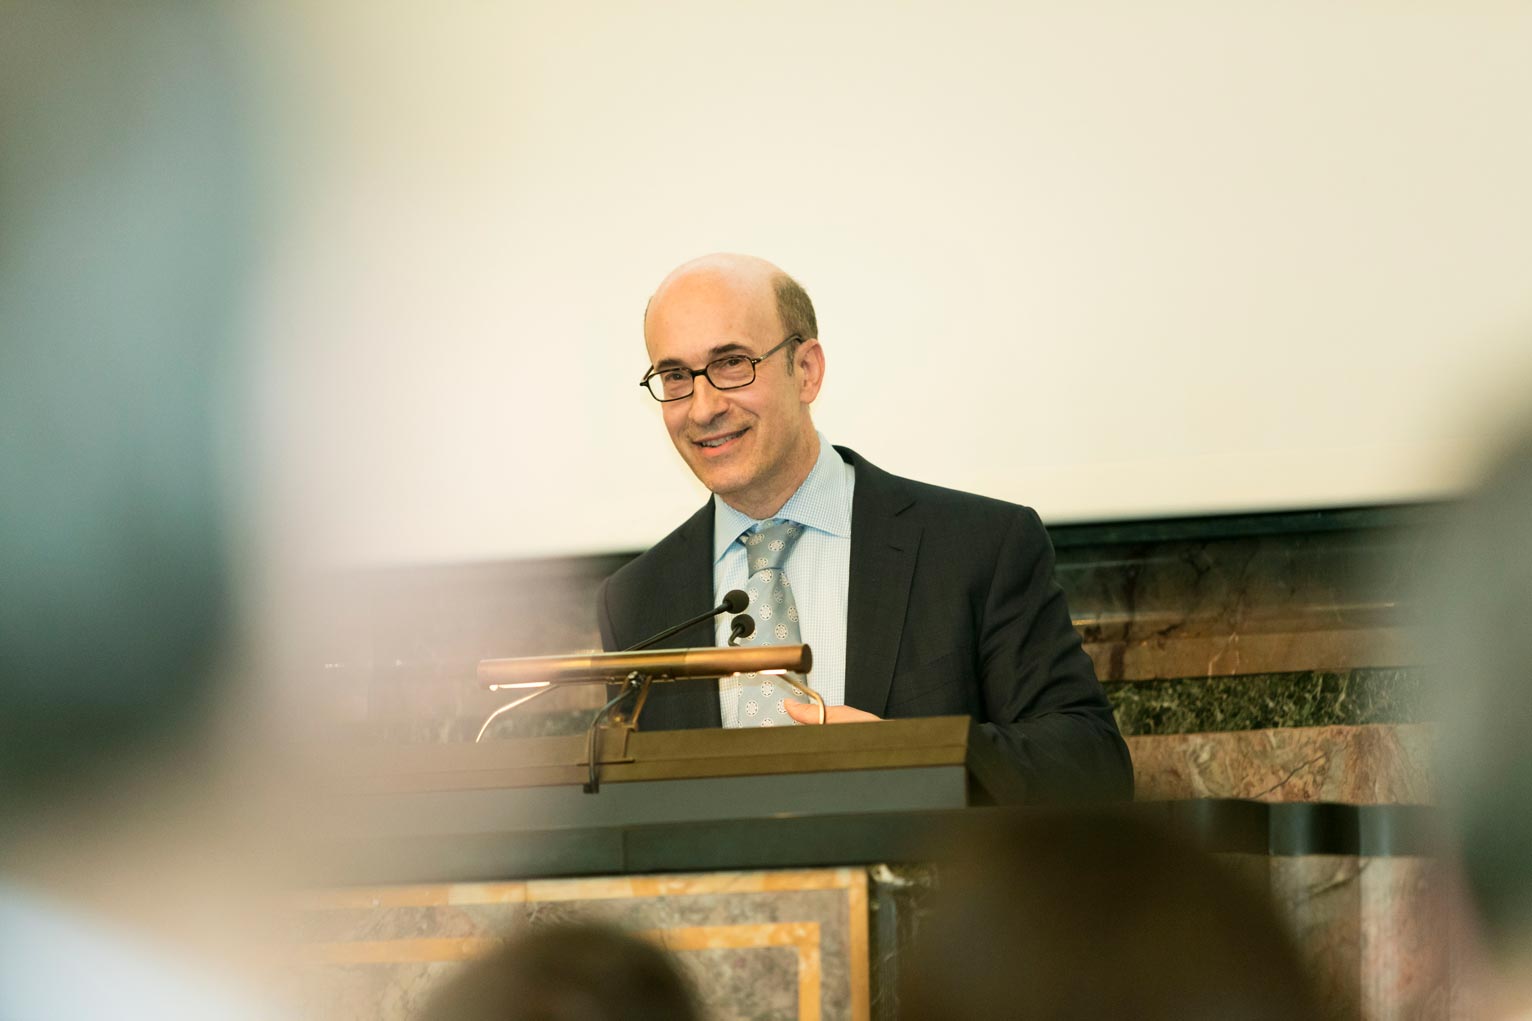 Ken Rogoff advocates for a gradual phase-out of cash